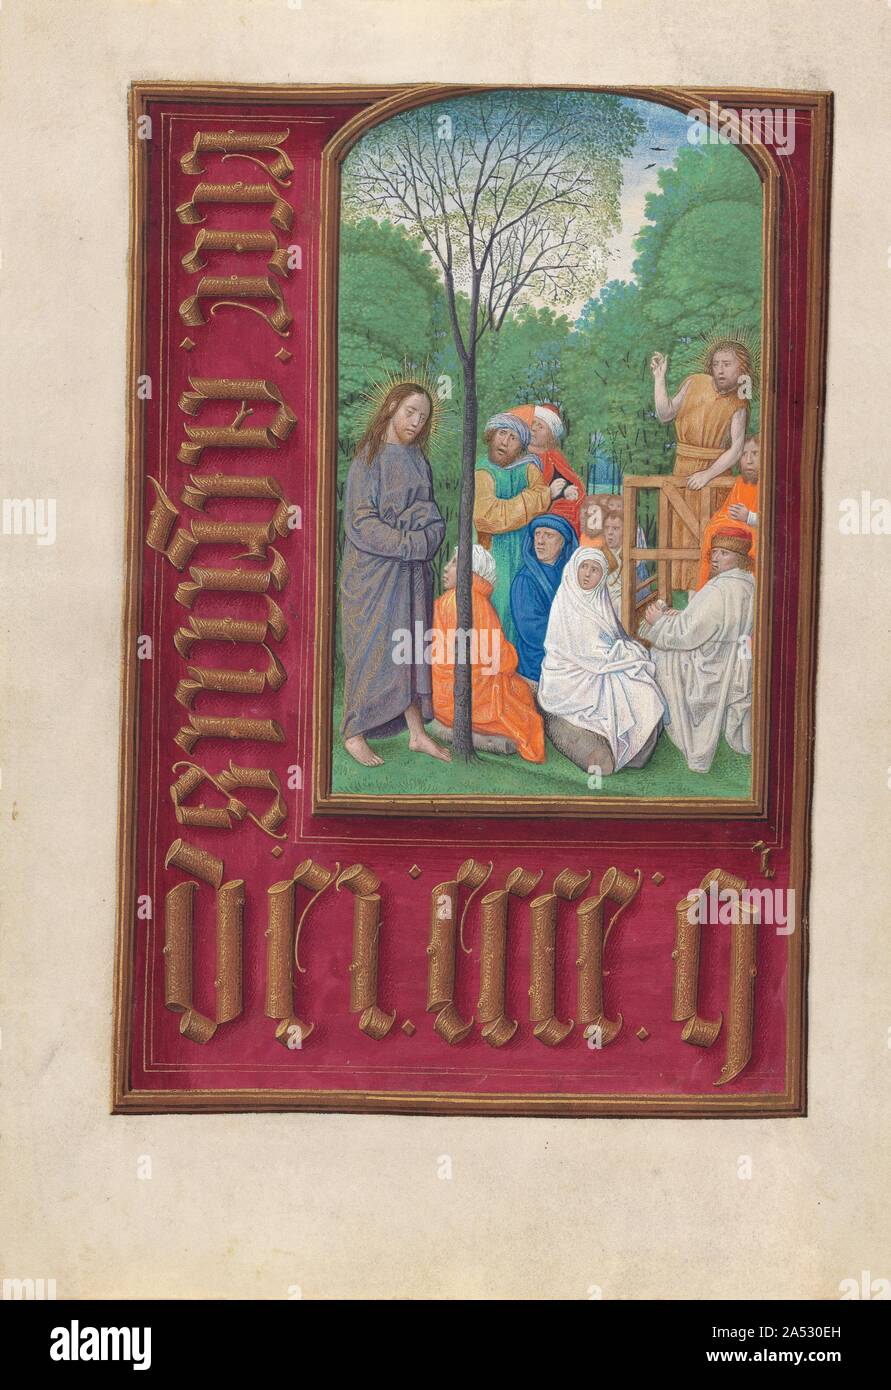 Hours of Queen Isabella the Catholic, Queen of Spain: Fol. 169v, St. John the Baptist Preaching, c. 1500. This manuscript was illuminated by a circle of at least five highly organized manuscript painters active in the Flemish cities of Ghent and Bruges. The principal illuminator was Alexander Bening, who painted the majority of the book's miniatures. Manuscripts produced by this circle of artists are renowned for the decoration of their borders, which typically feature a rich variety of realistically-painted flowers, birds, and butterflies. This prayer book, called a book of hours, was intende Stock Photo